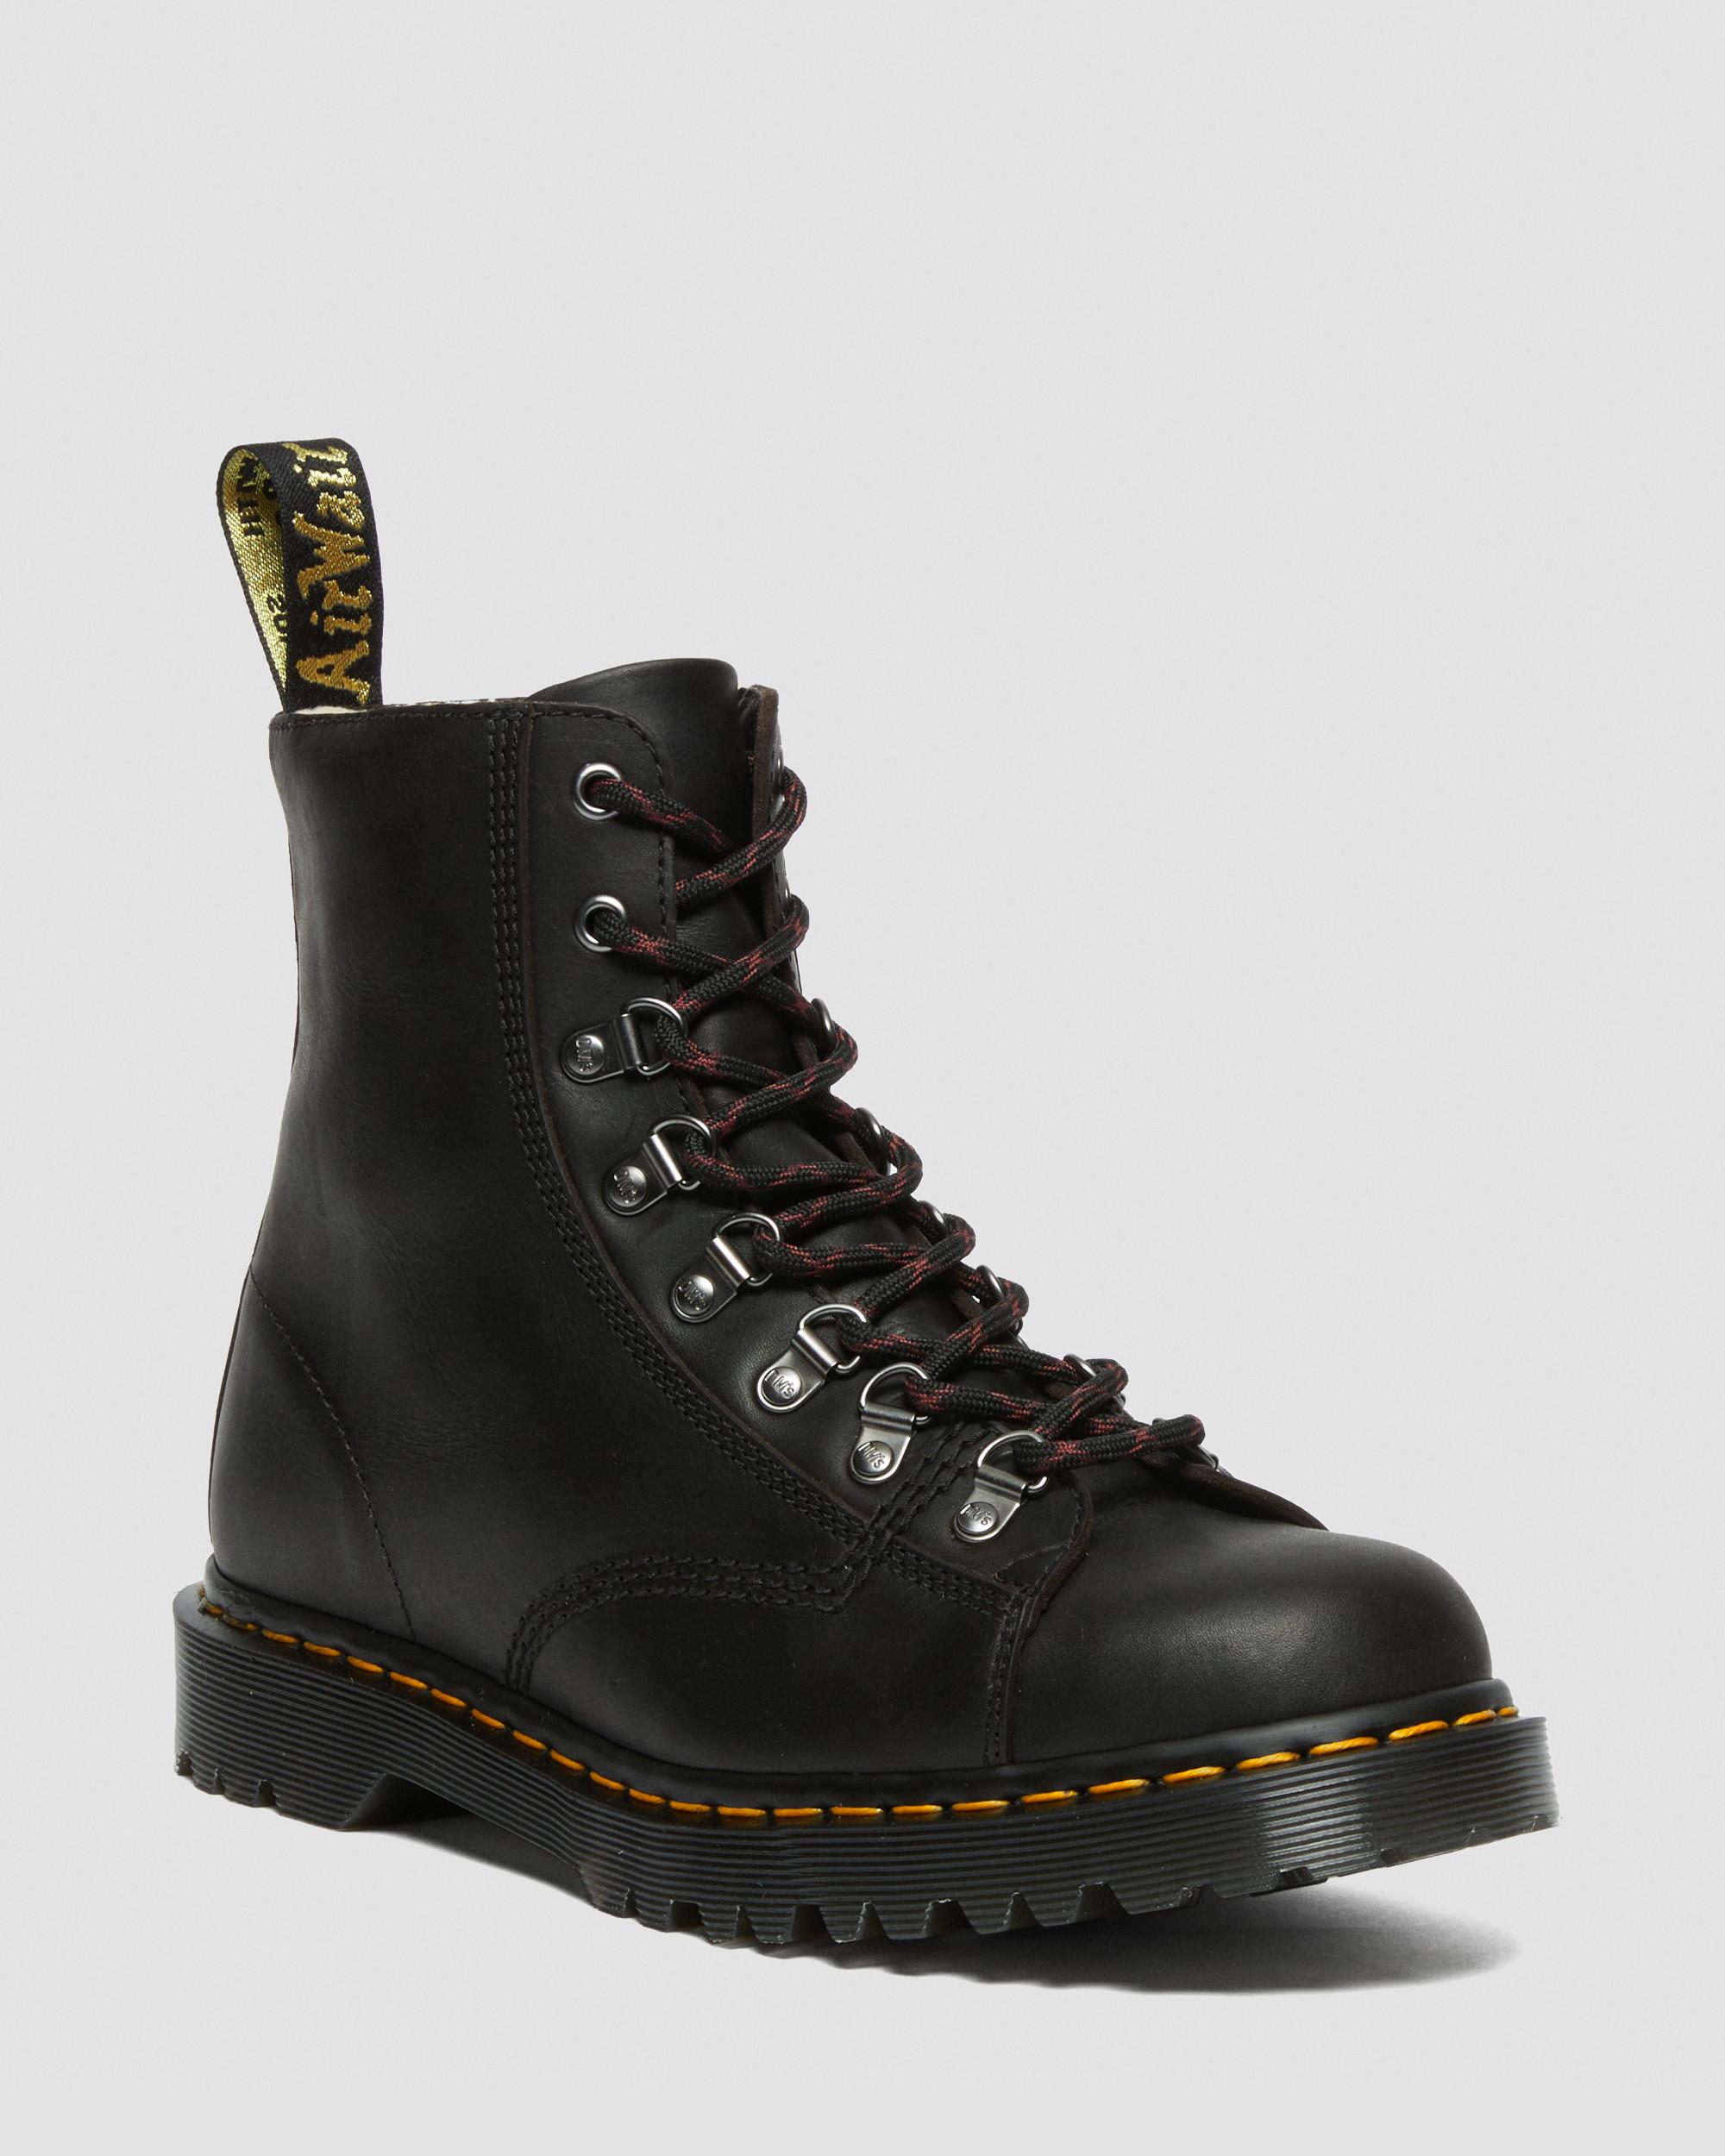 Barton Made in England Classic Oil Leather Boots in Black | Dr 